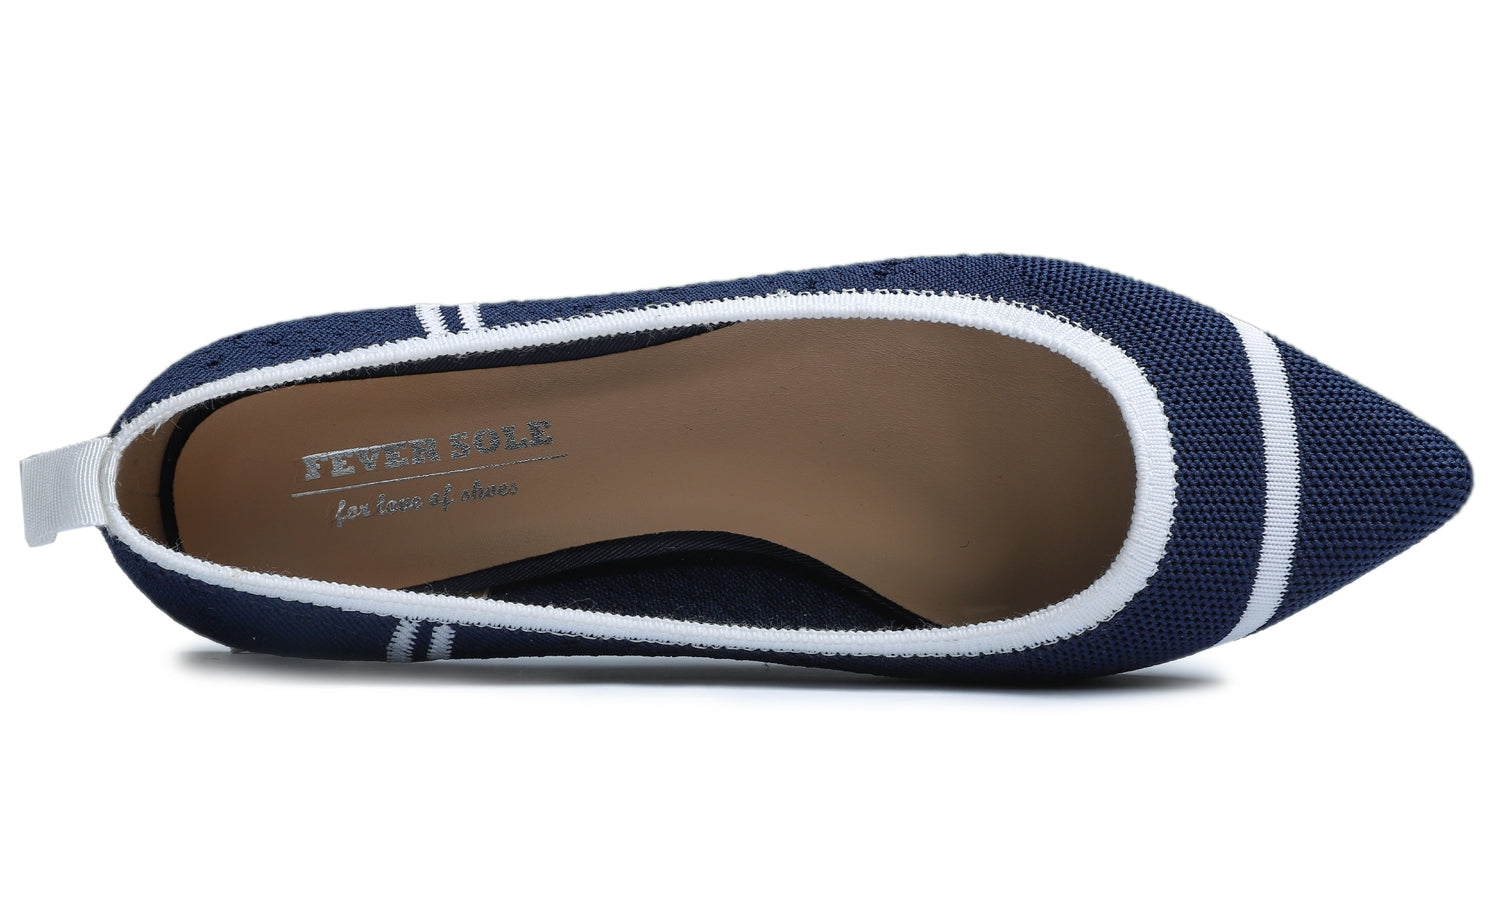 Feversole Women's Woven Fashion Breathable Knit Flat Shoes Pointed Navy White Stripe